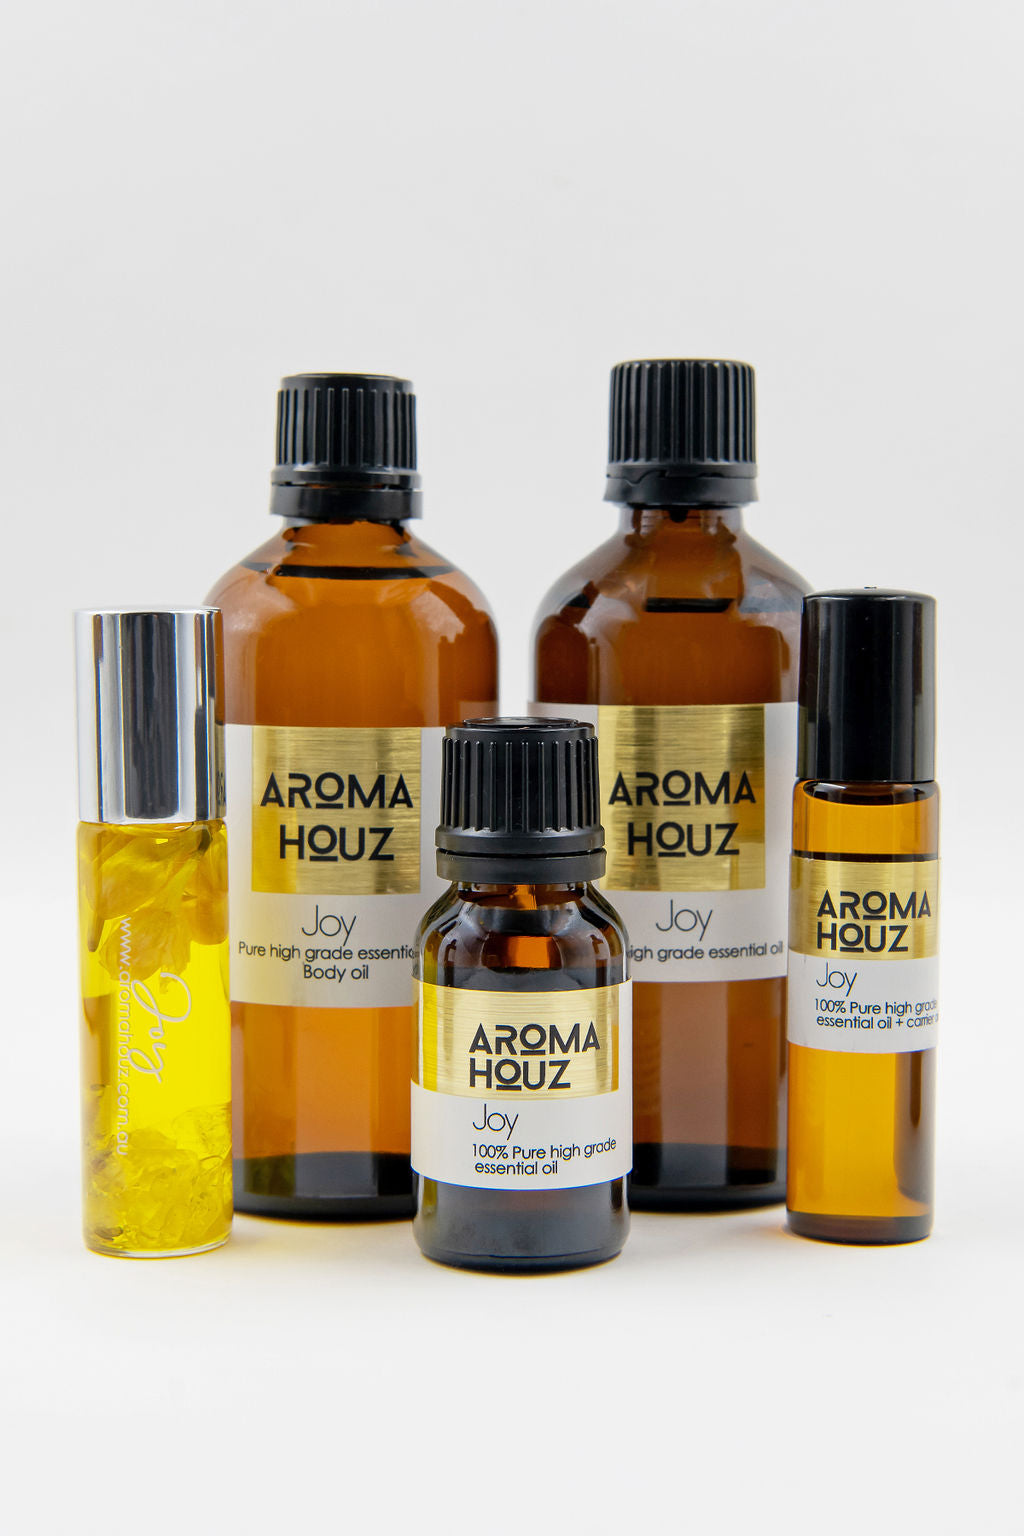 Assortment of Aroma Houz essential oil bottles in various sizes against a white background